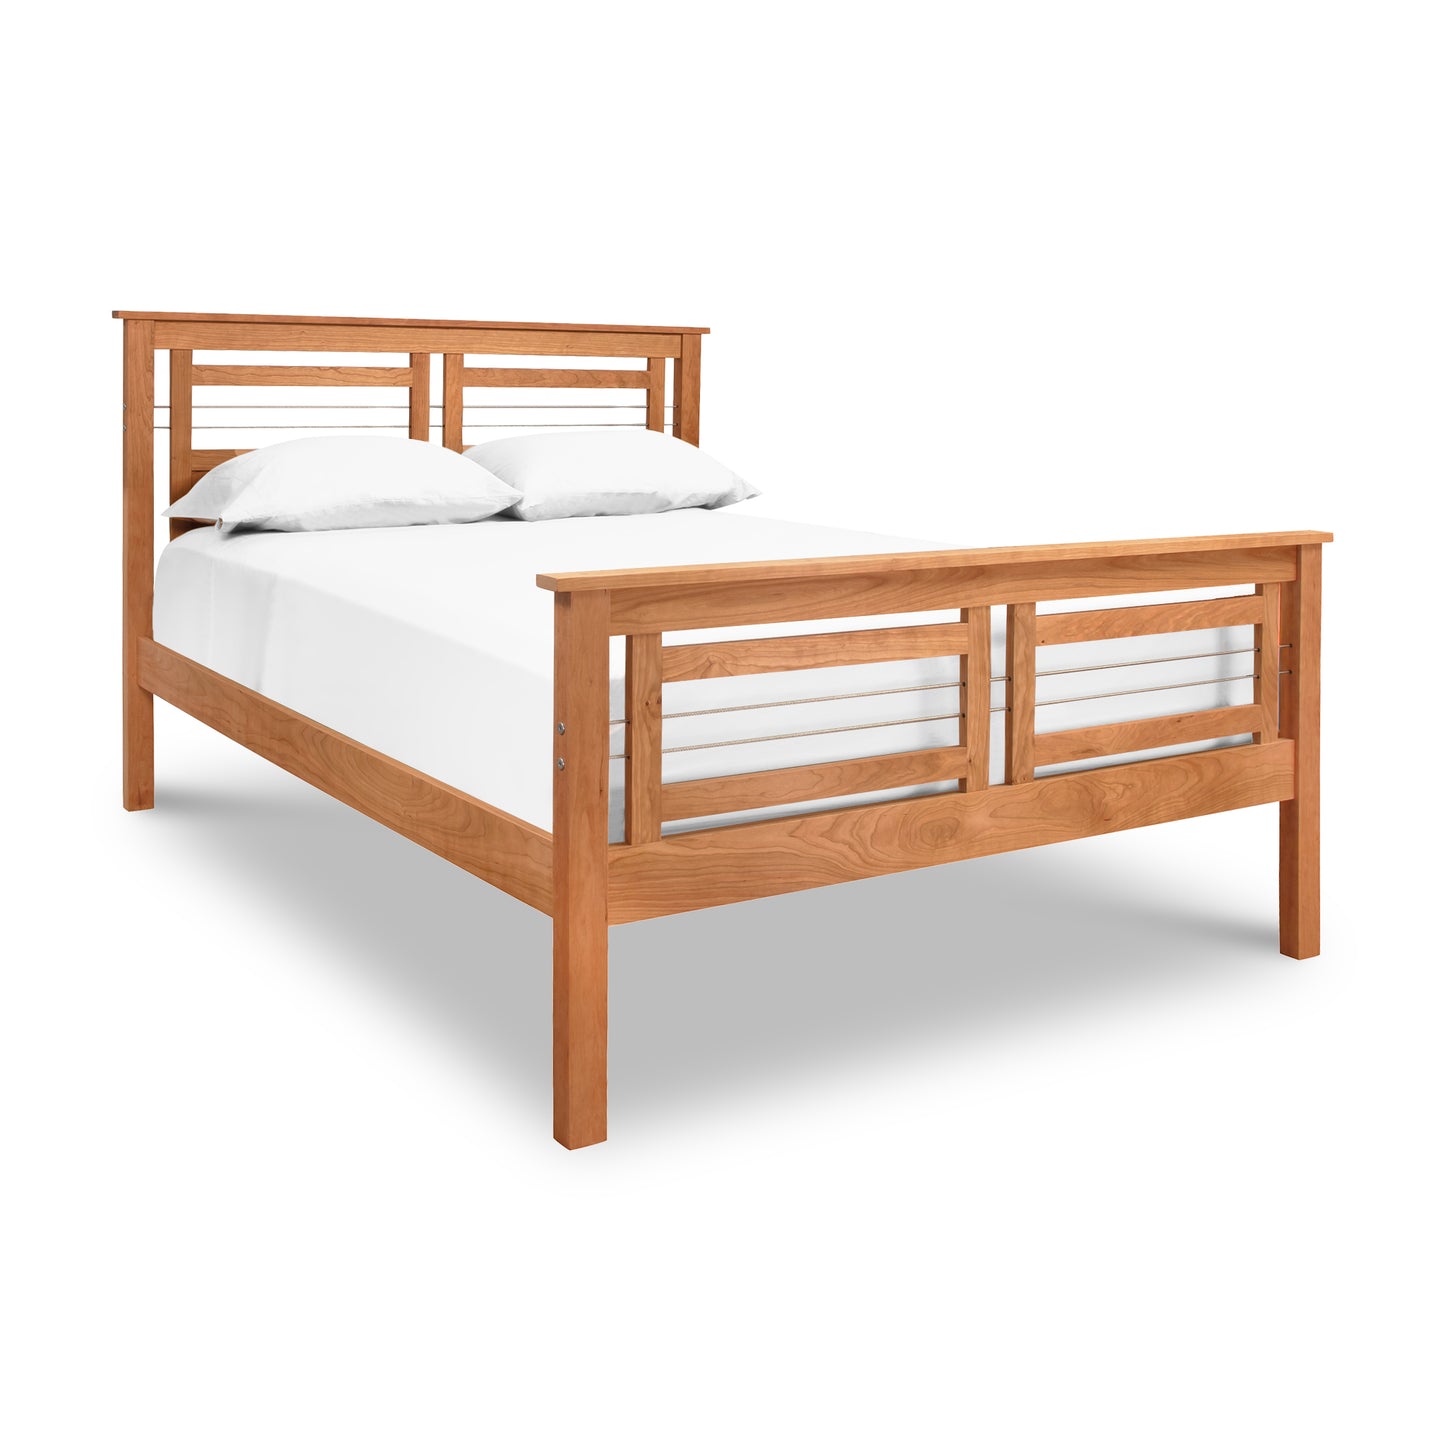 A Contemporary Cable Bed frame by Vermont Furniture Designs with a solid hardwood construction, featuring a white mattress and two pillows against a white background.